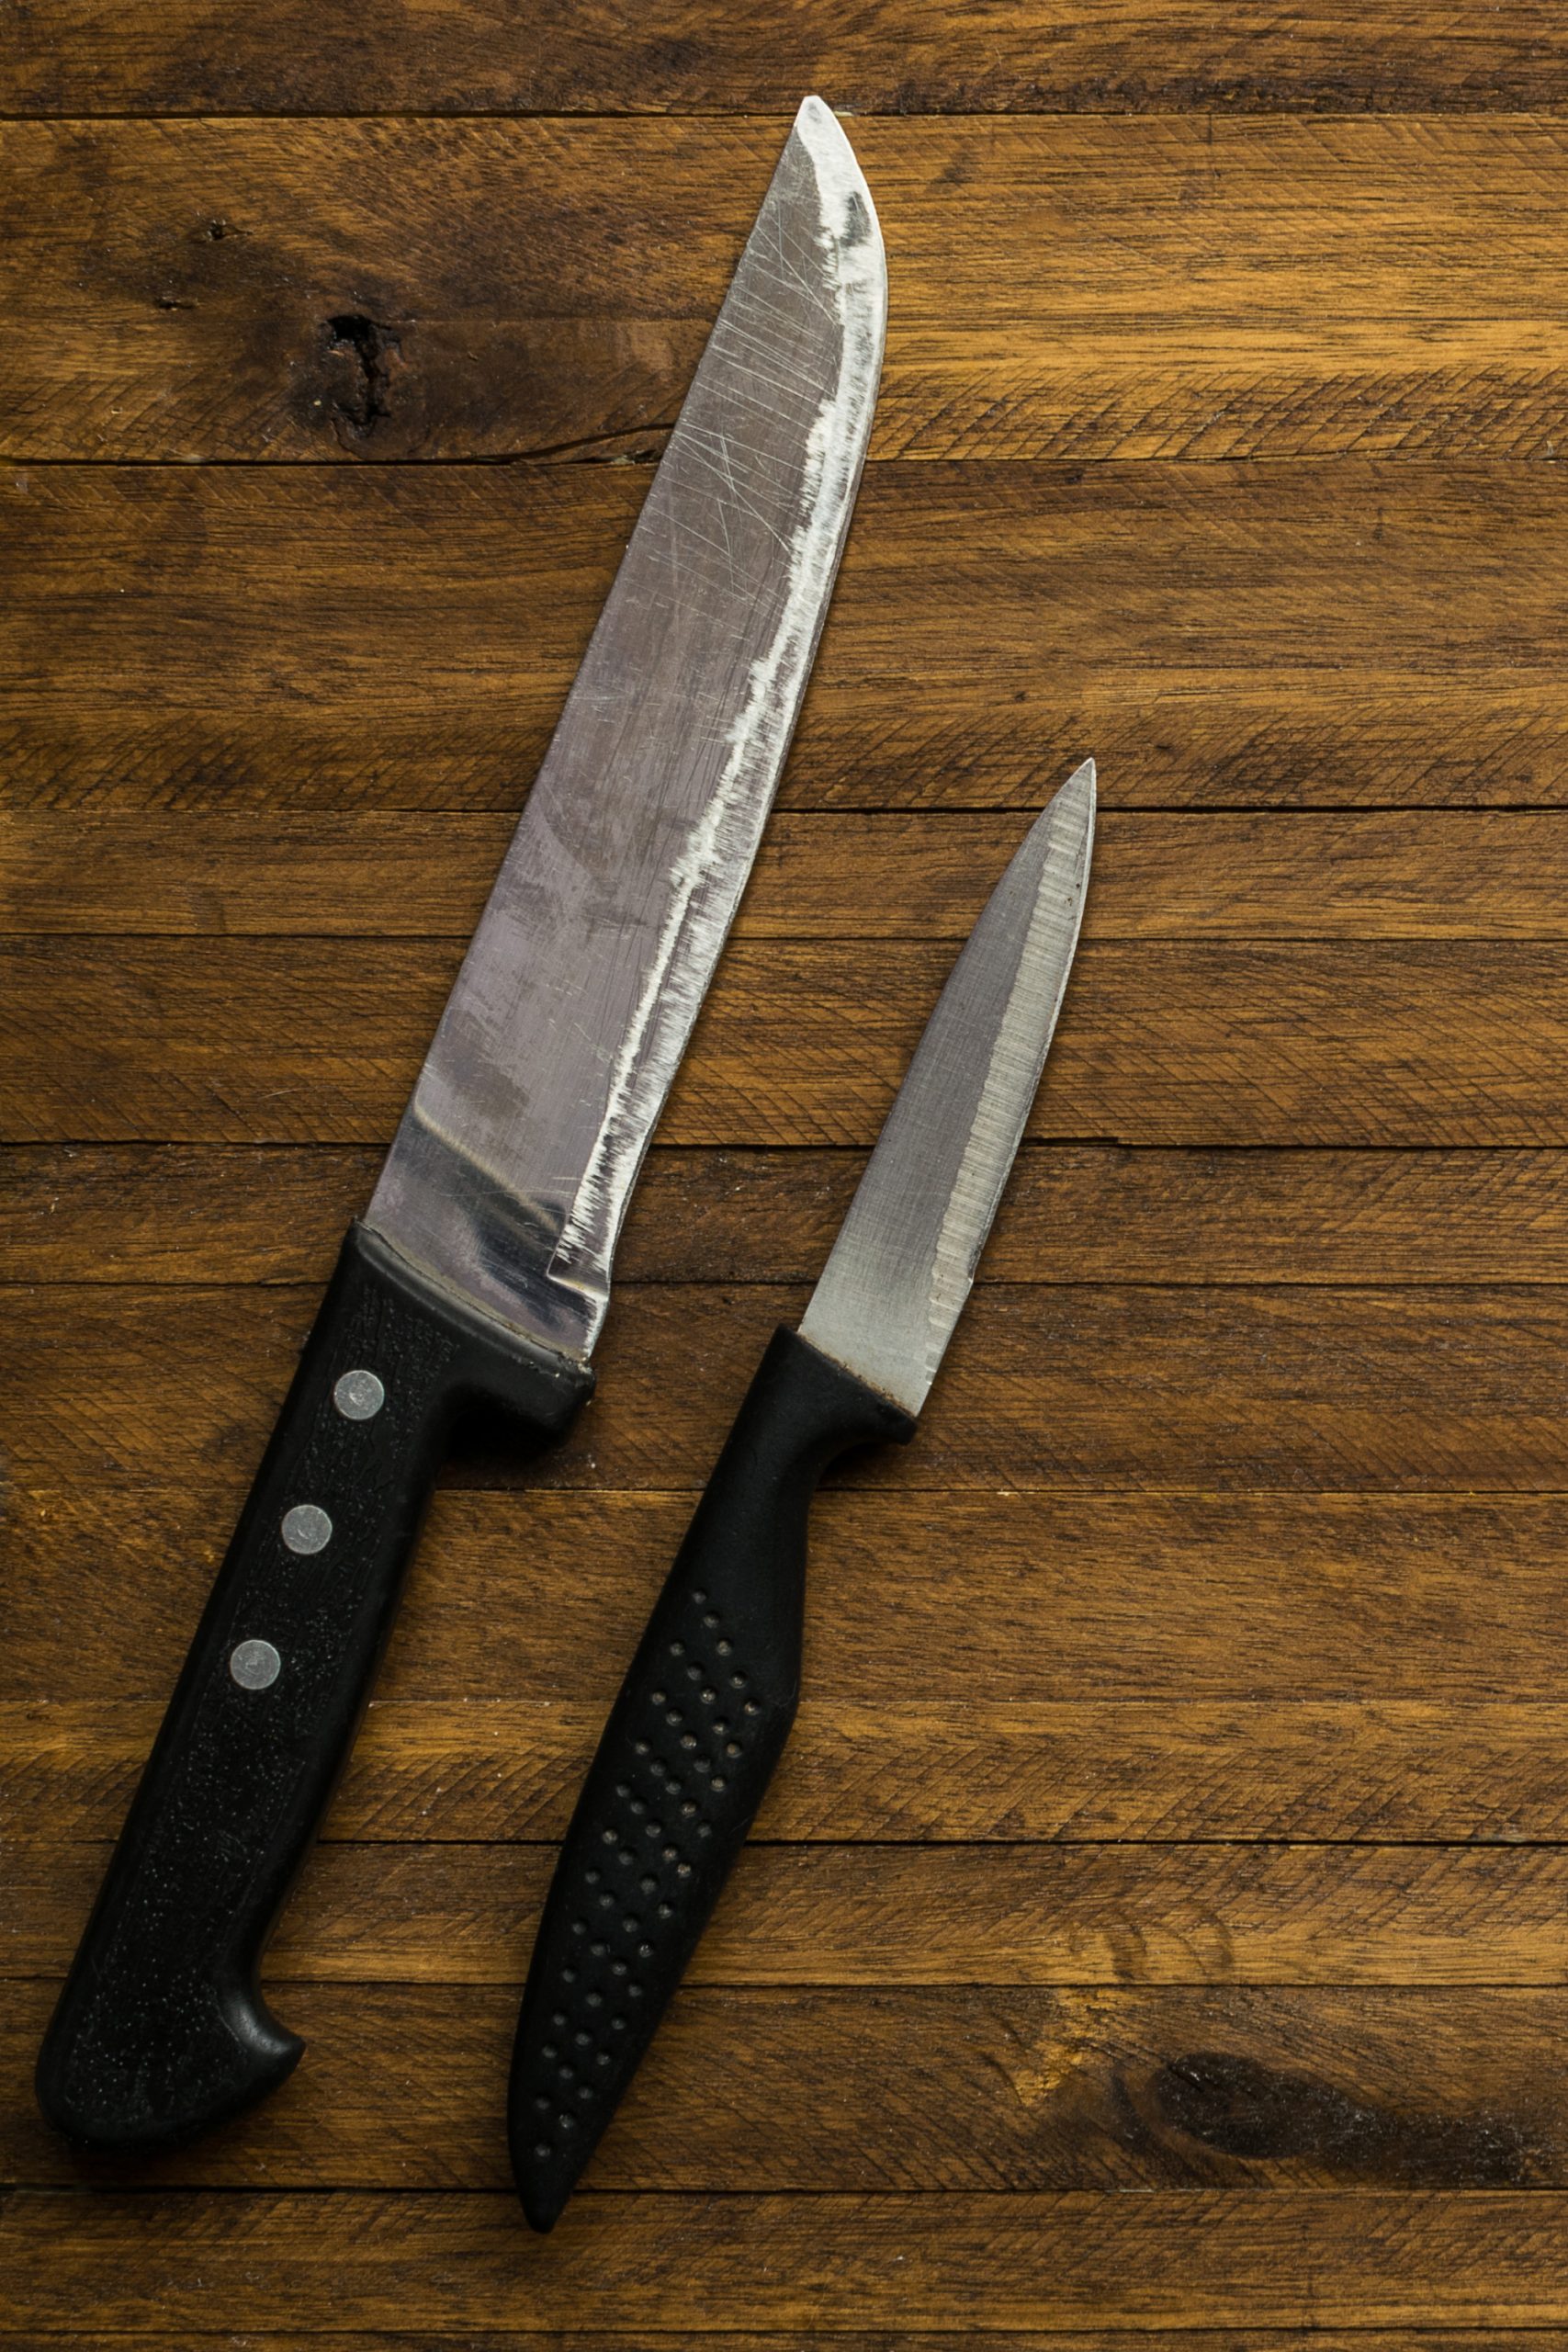 Two knives on a wooden table.